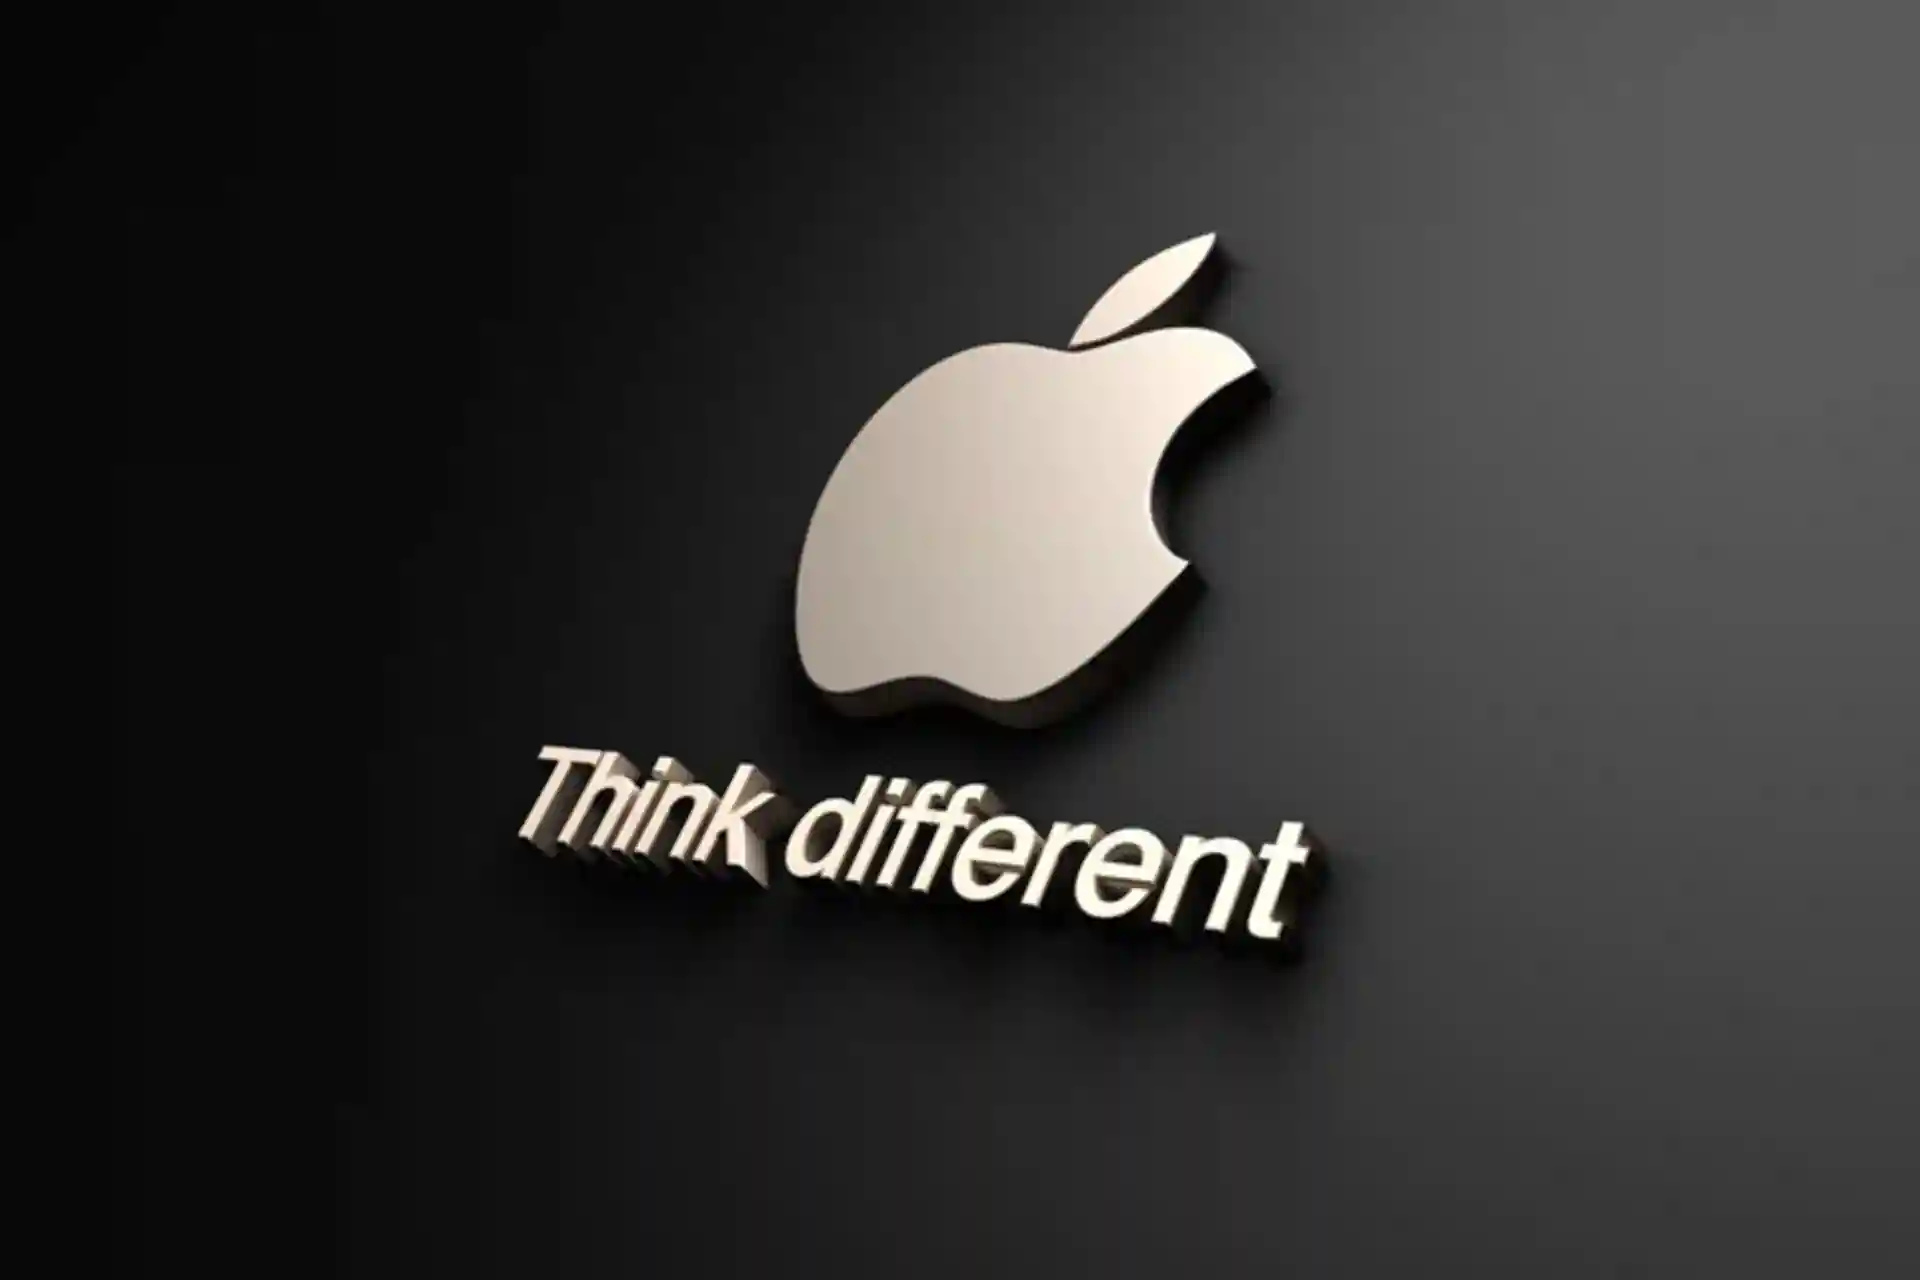 Characteristic Tagline and slogan from Apple